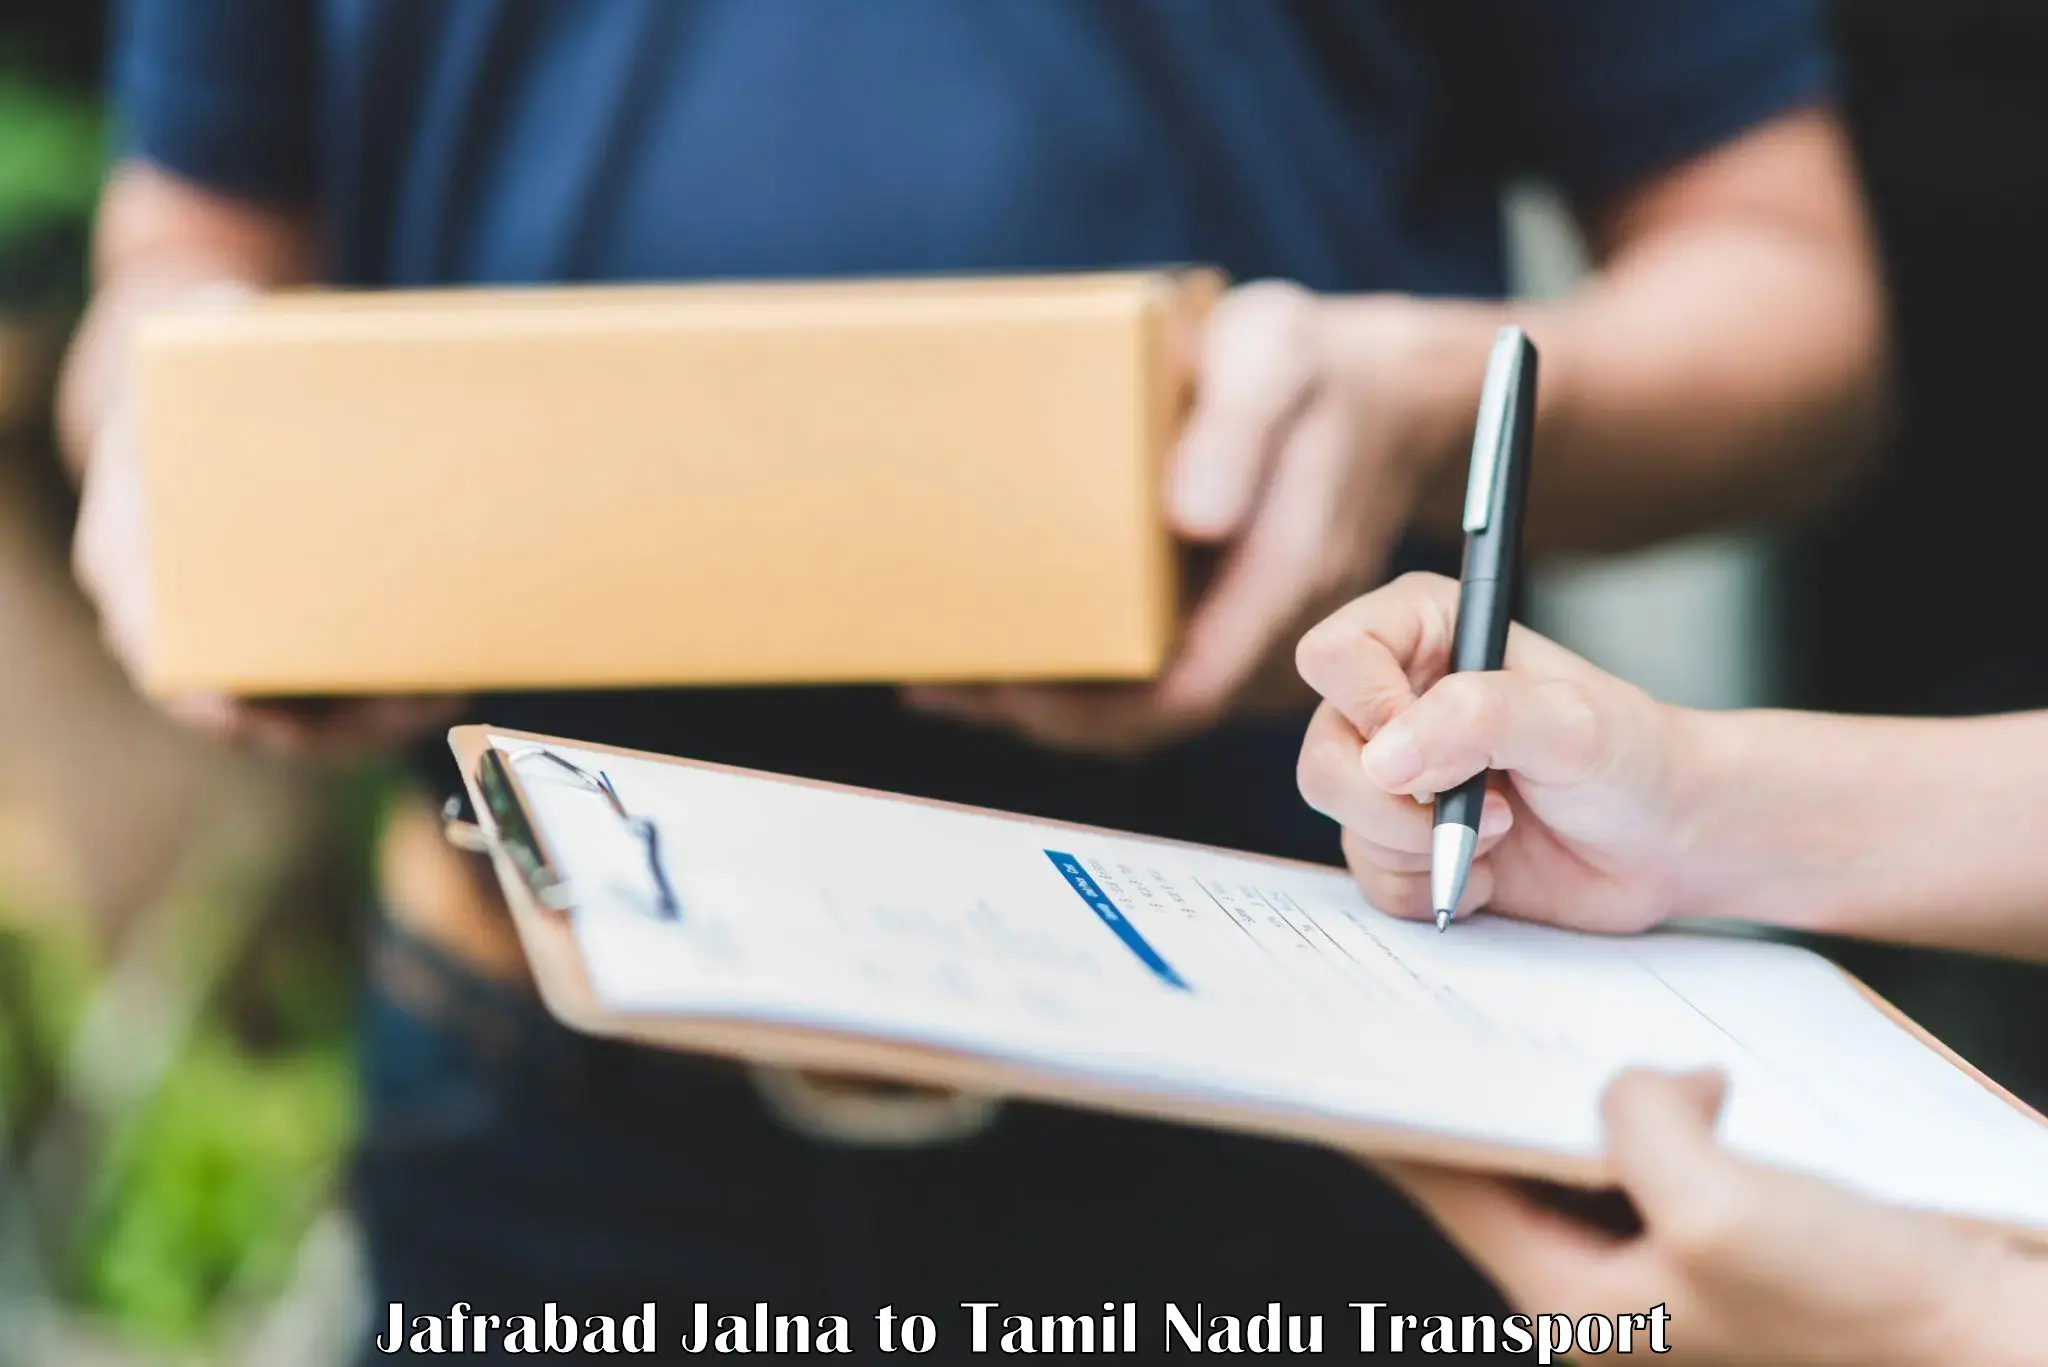 Shipping services in Jafrabad Jalna to Tamil Nadu